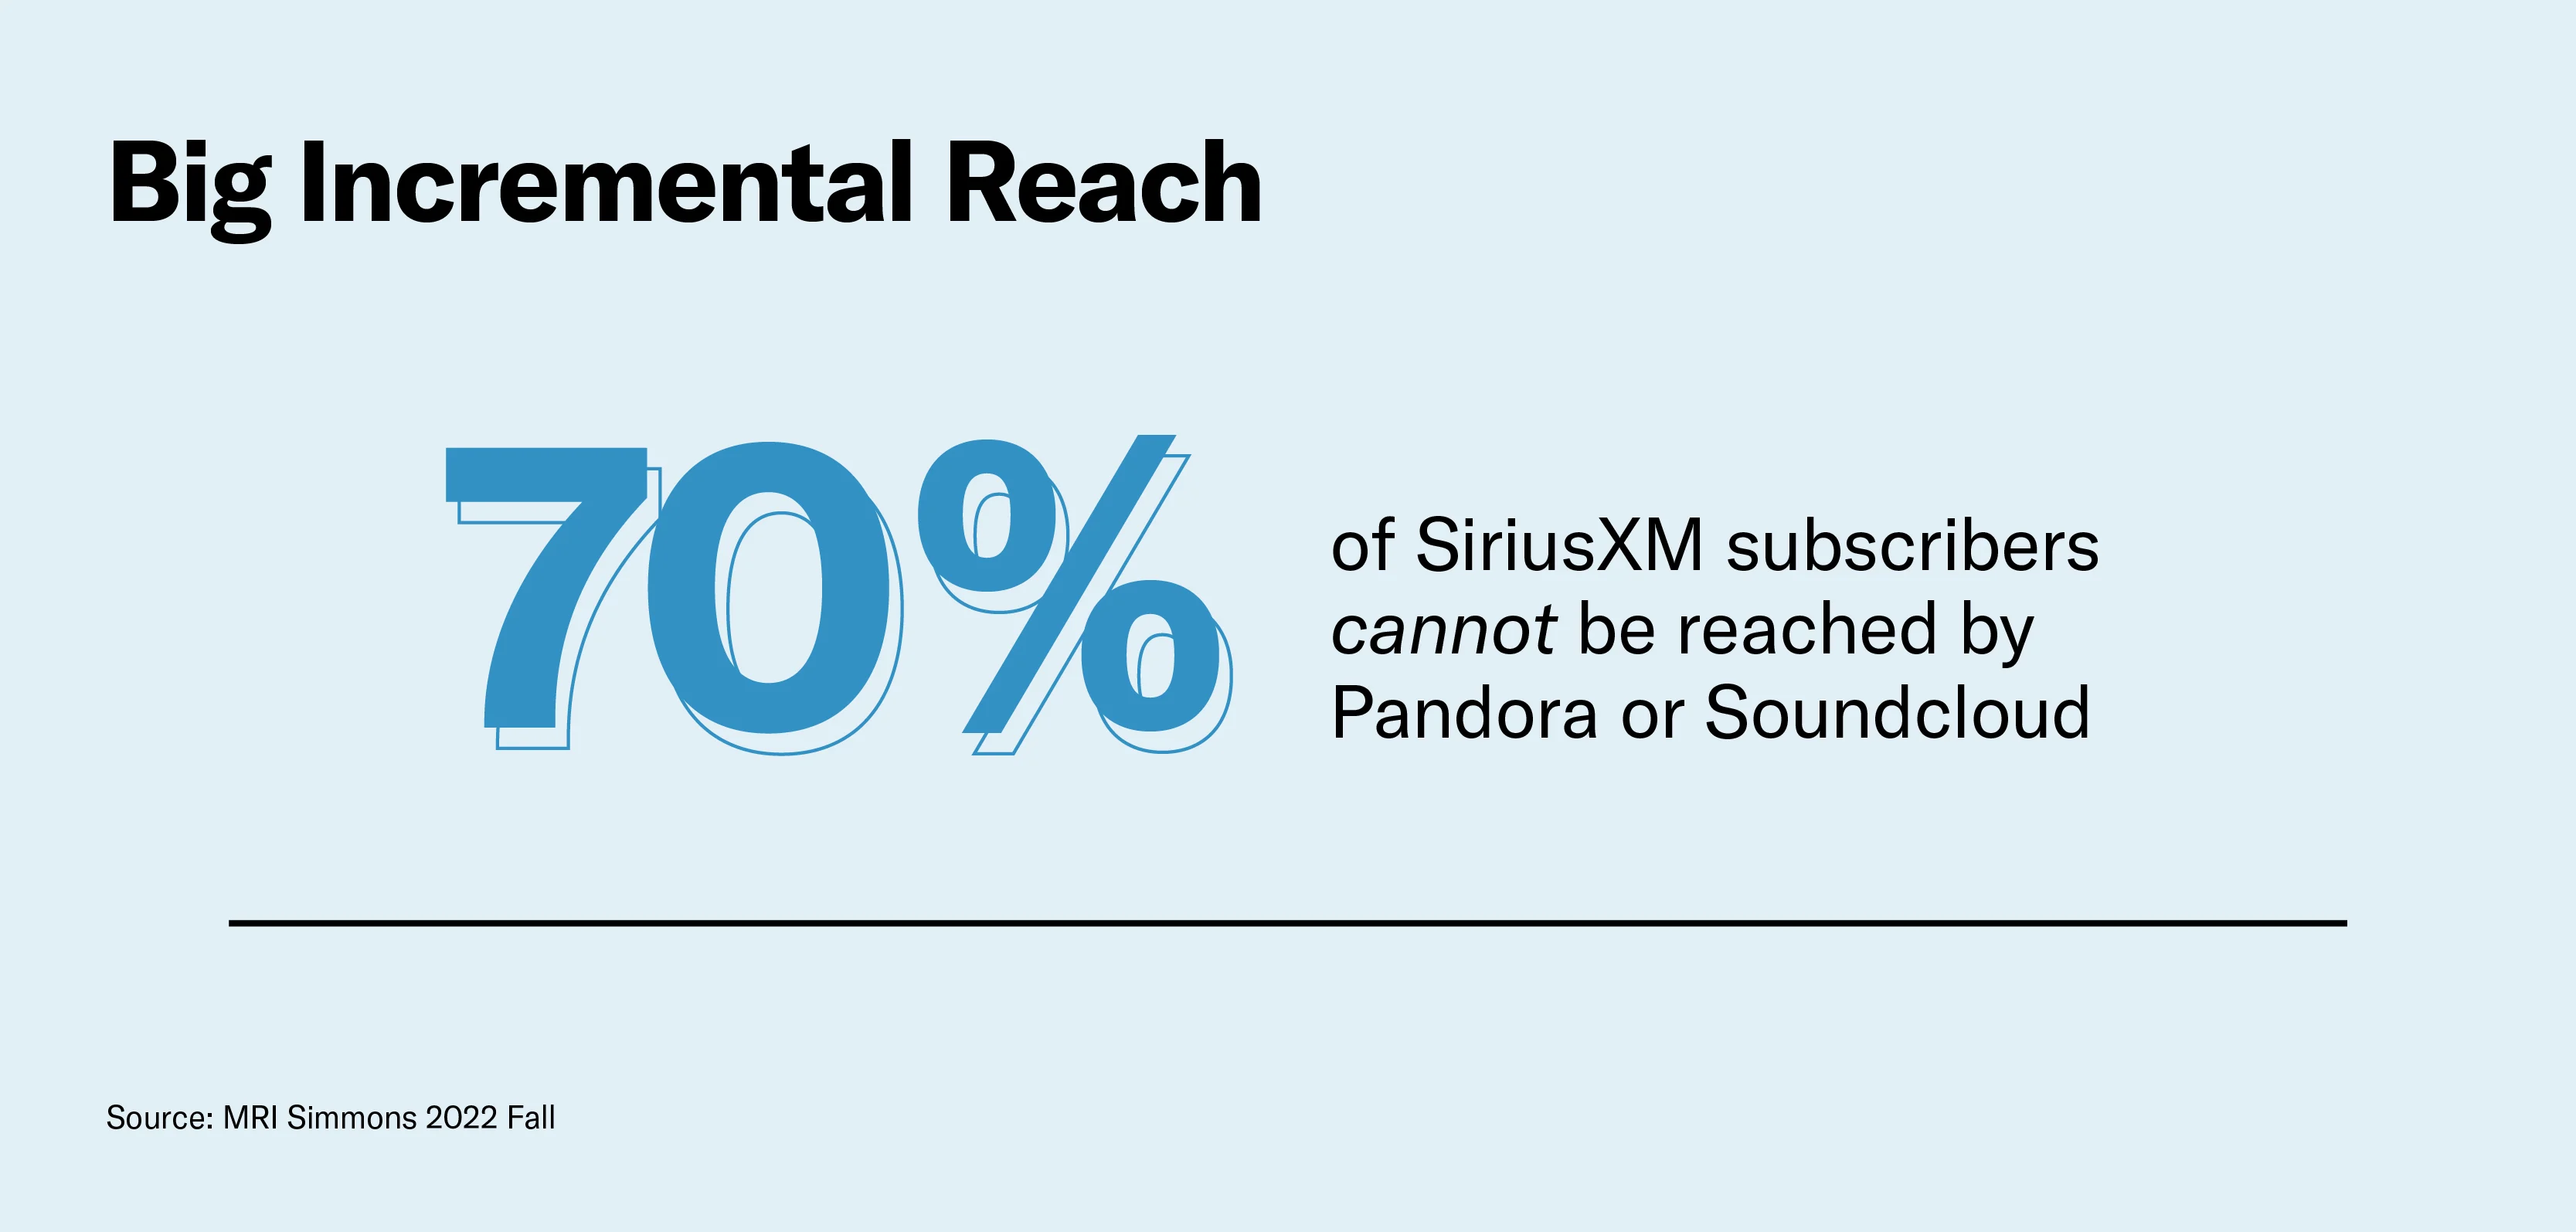 SiriusXM offers incremental reach over other digital audio formats